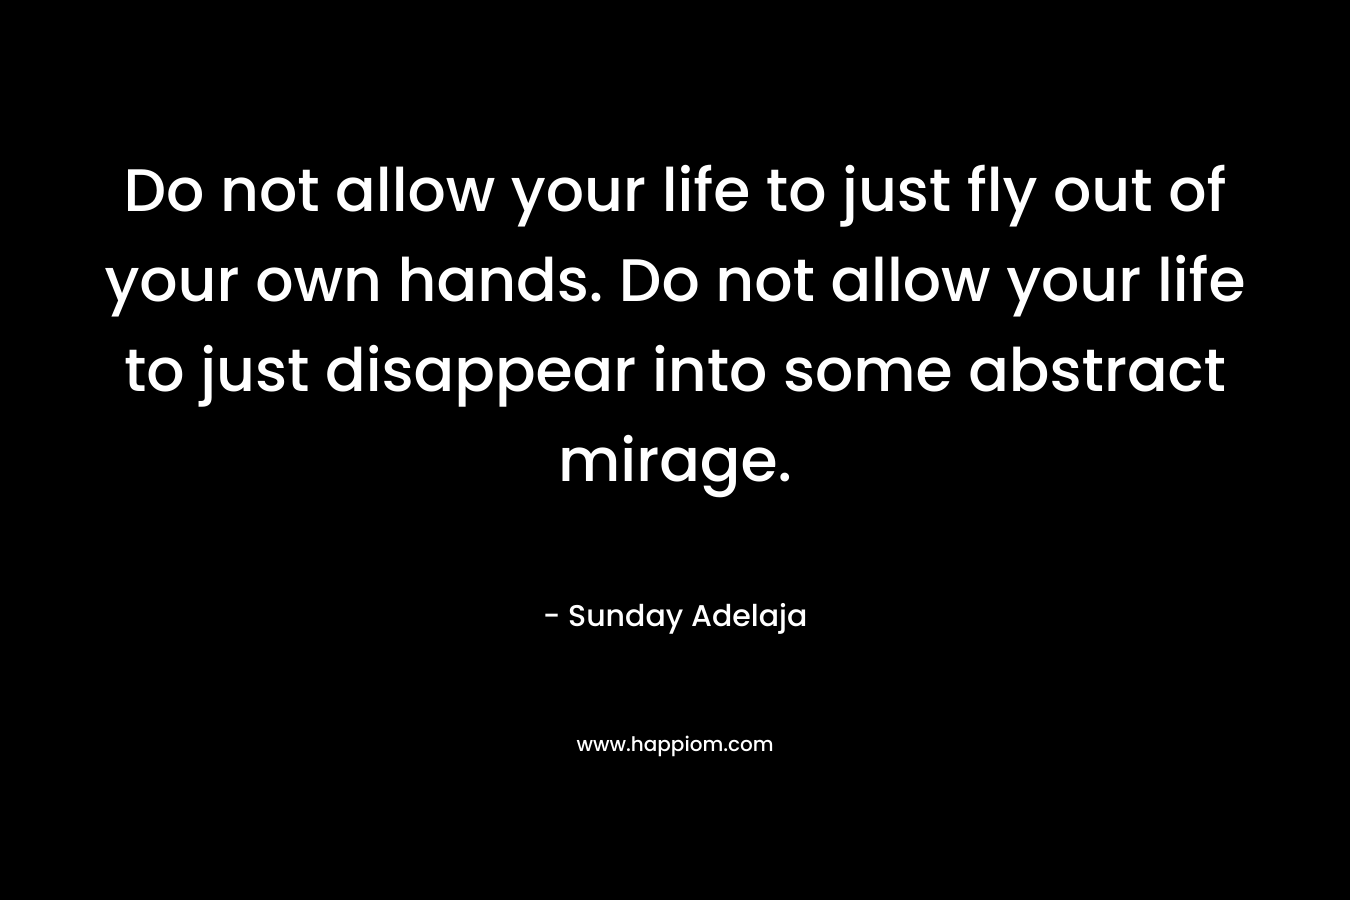 Do not allow your life to just fly out of your own hands. Do not allow your life to just disappear into some abstract mirage.